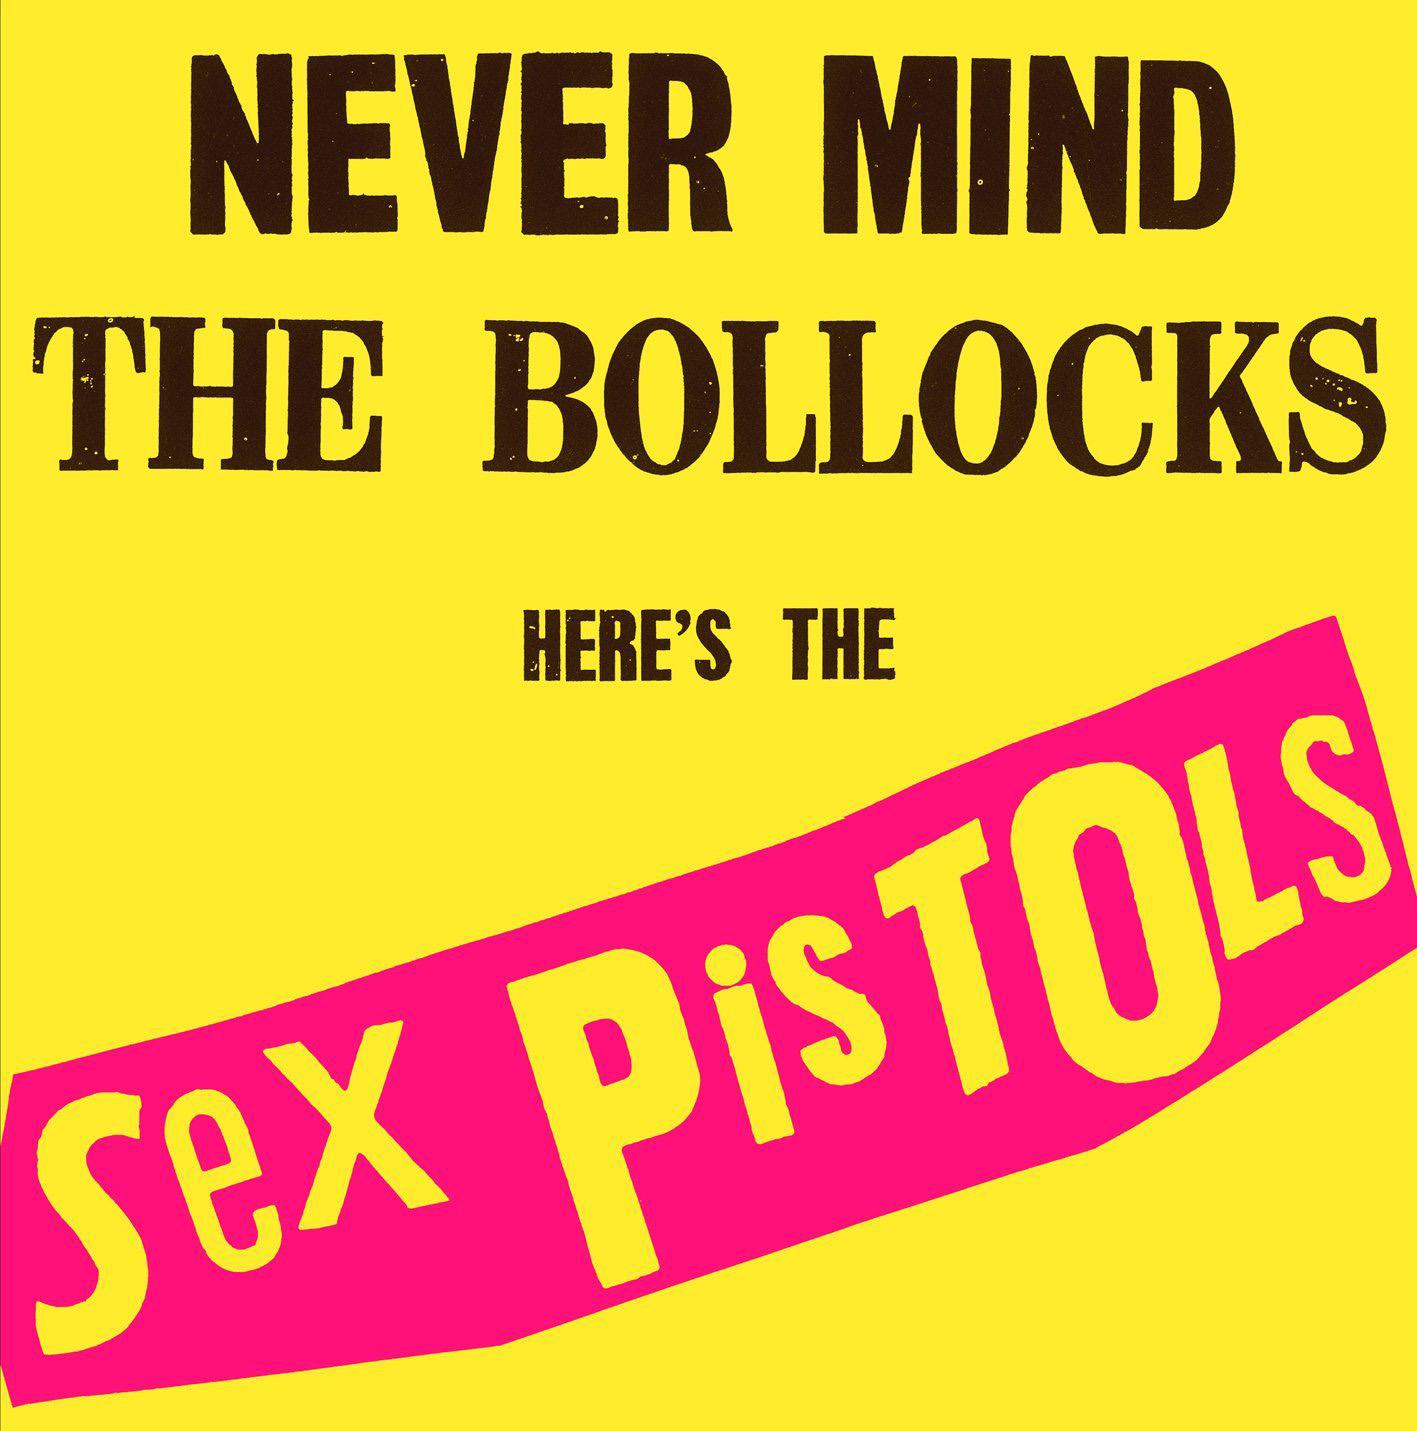 The cover of the Sex Pistols album ‘Never Mind the Bollocks’